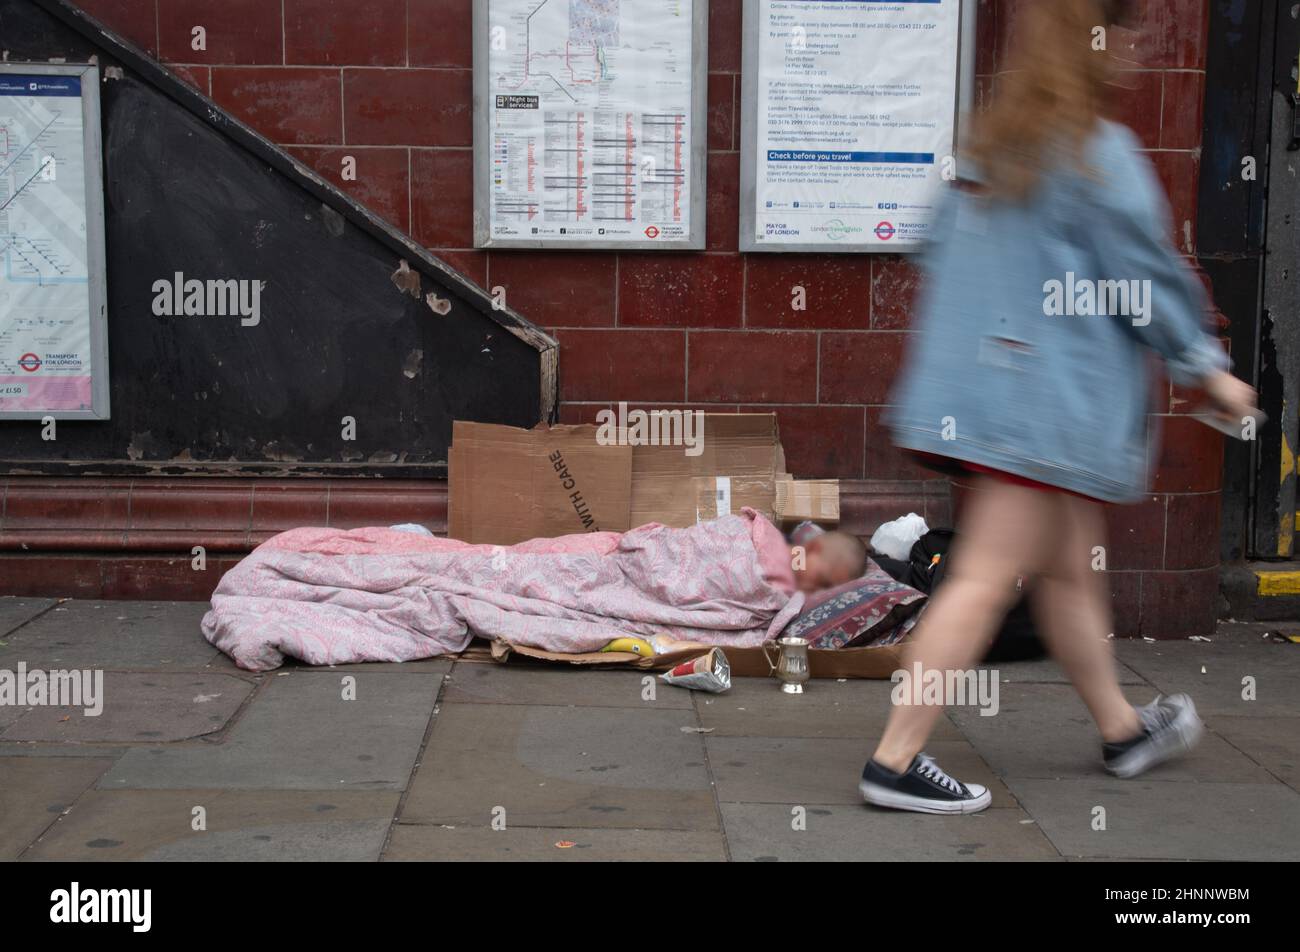 Unrecognized homeless person sleeping outside a metro station in the street Stock Photo